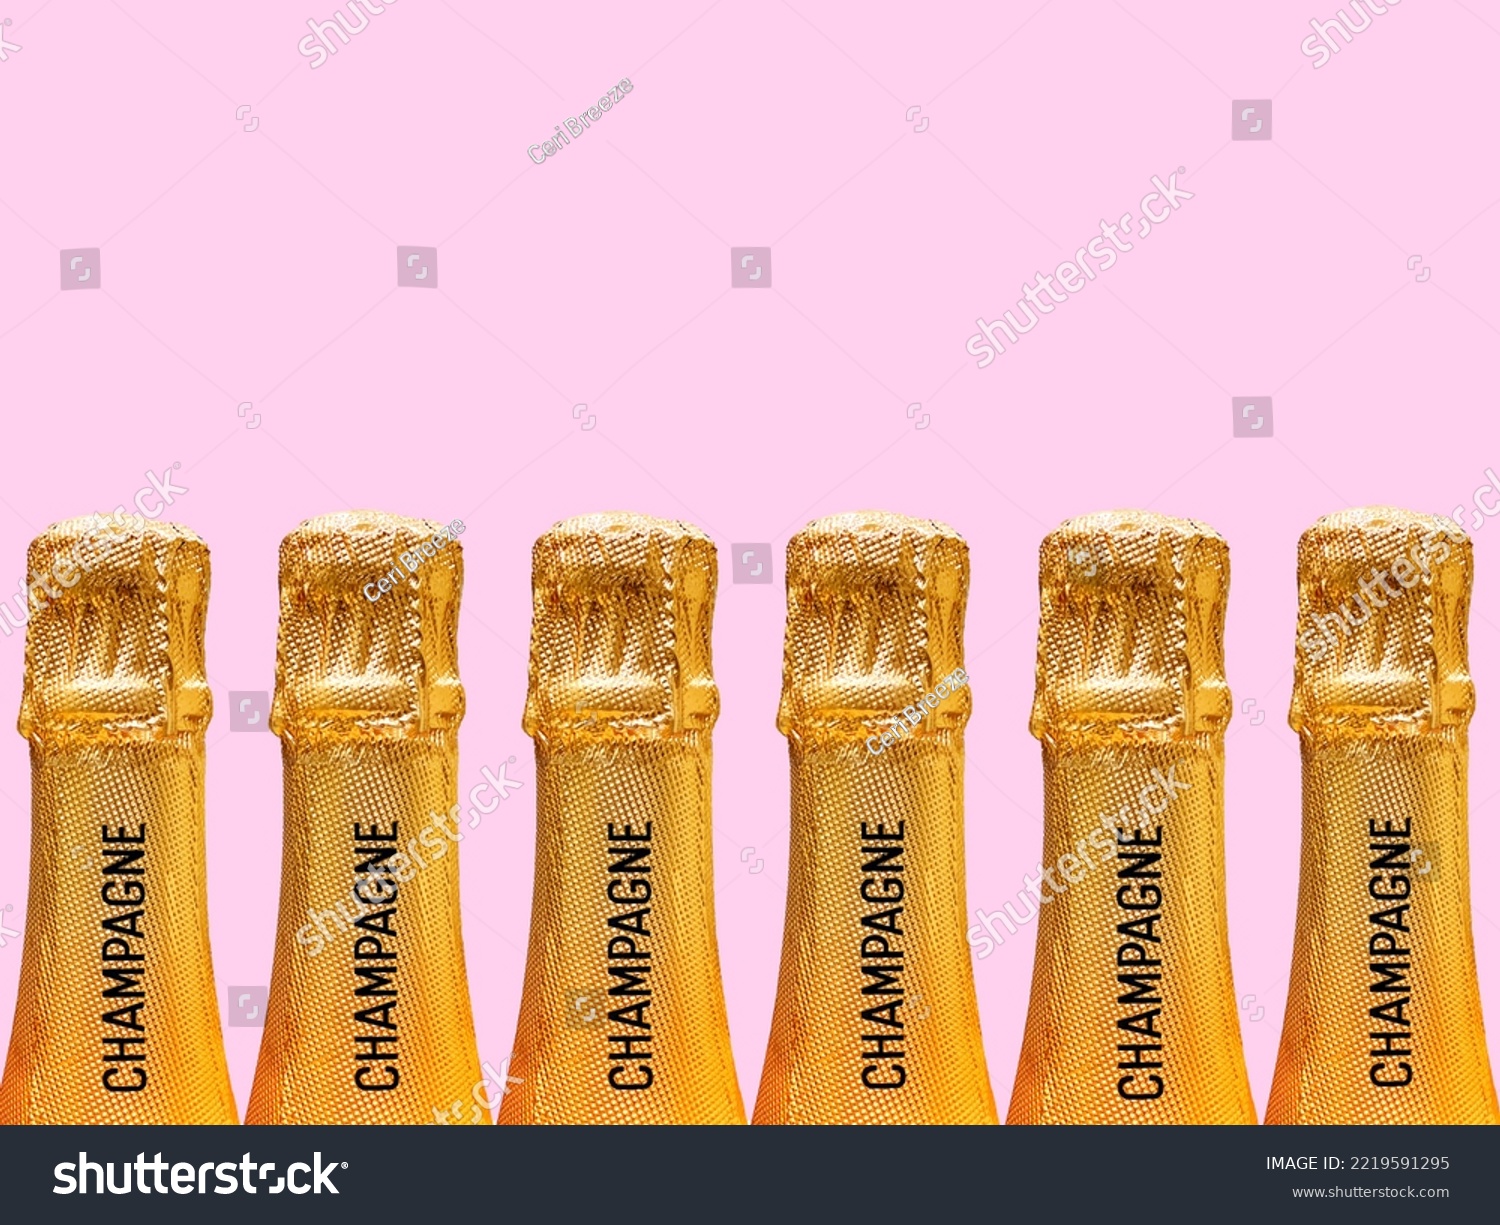 Row of champagne bottles covered in gold foil stamped with the word champagne on the neck against a plain pink background. No people. Copy space. #2219591295